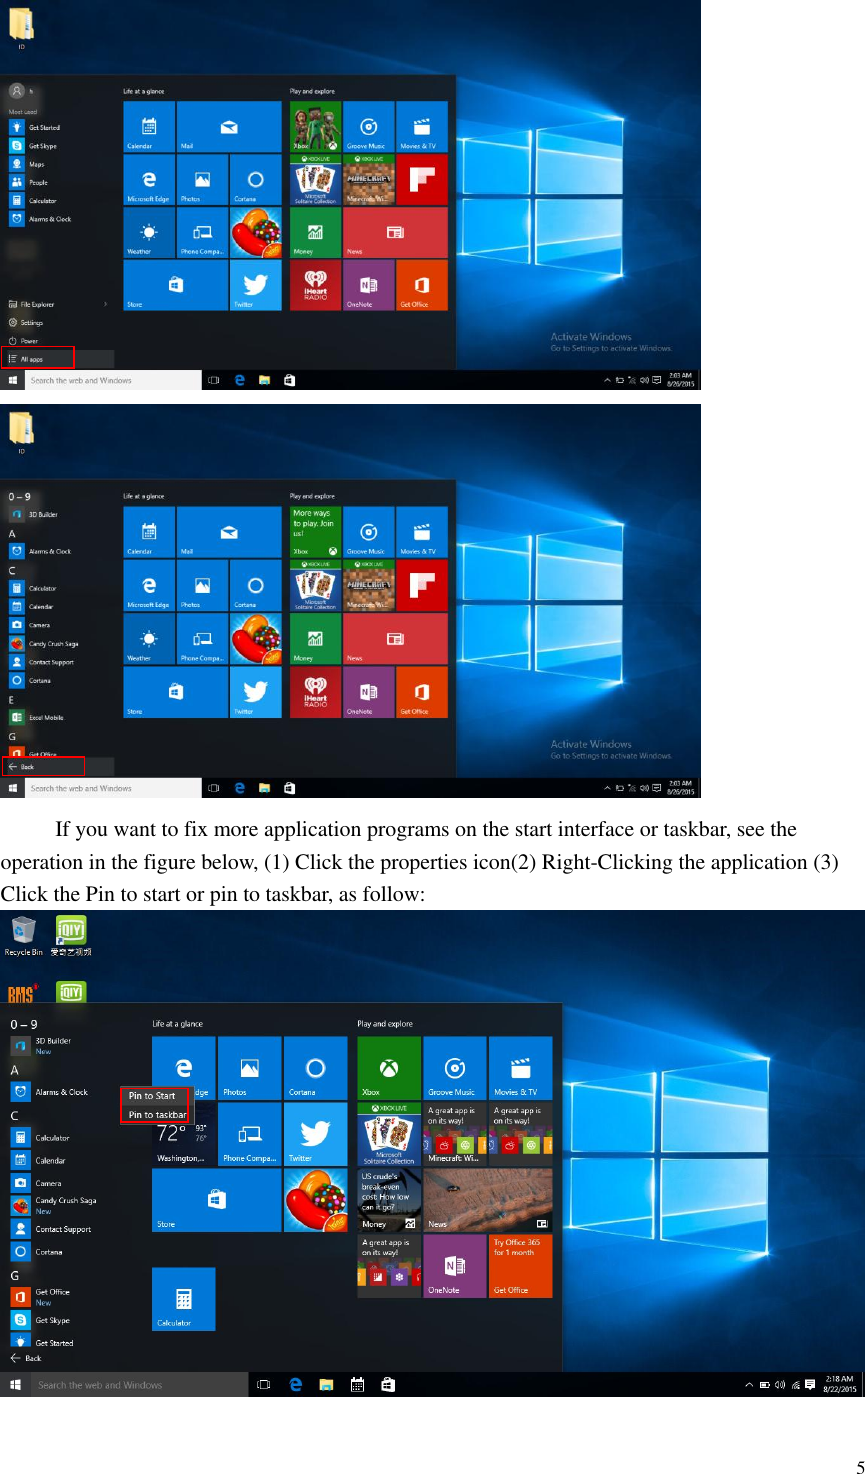  5    If you want to fix more application programs on the start interface or taskbar, see the operation in the figure below, (1) Click the properties icon(2) Right-Clicking the application (3) Click the Pin to start or pin to taskbar, as follow:     